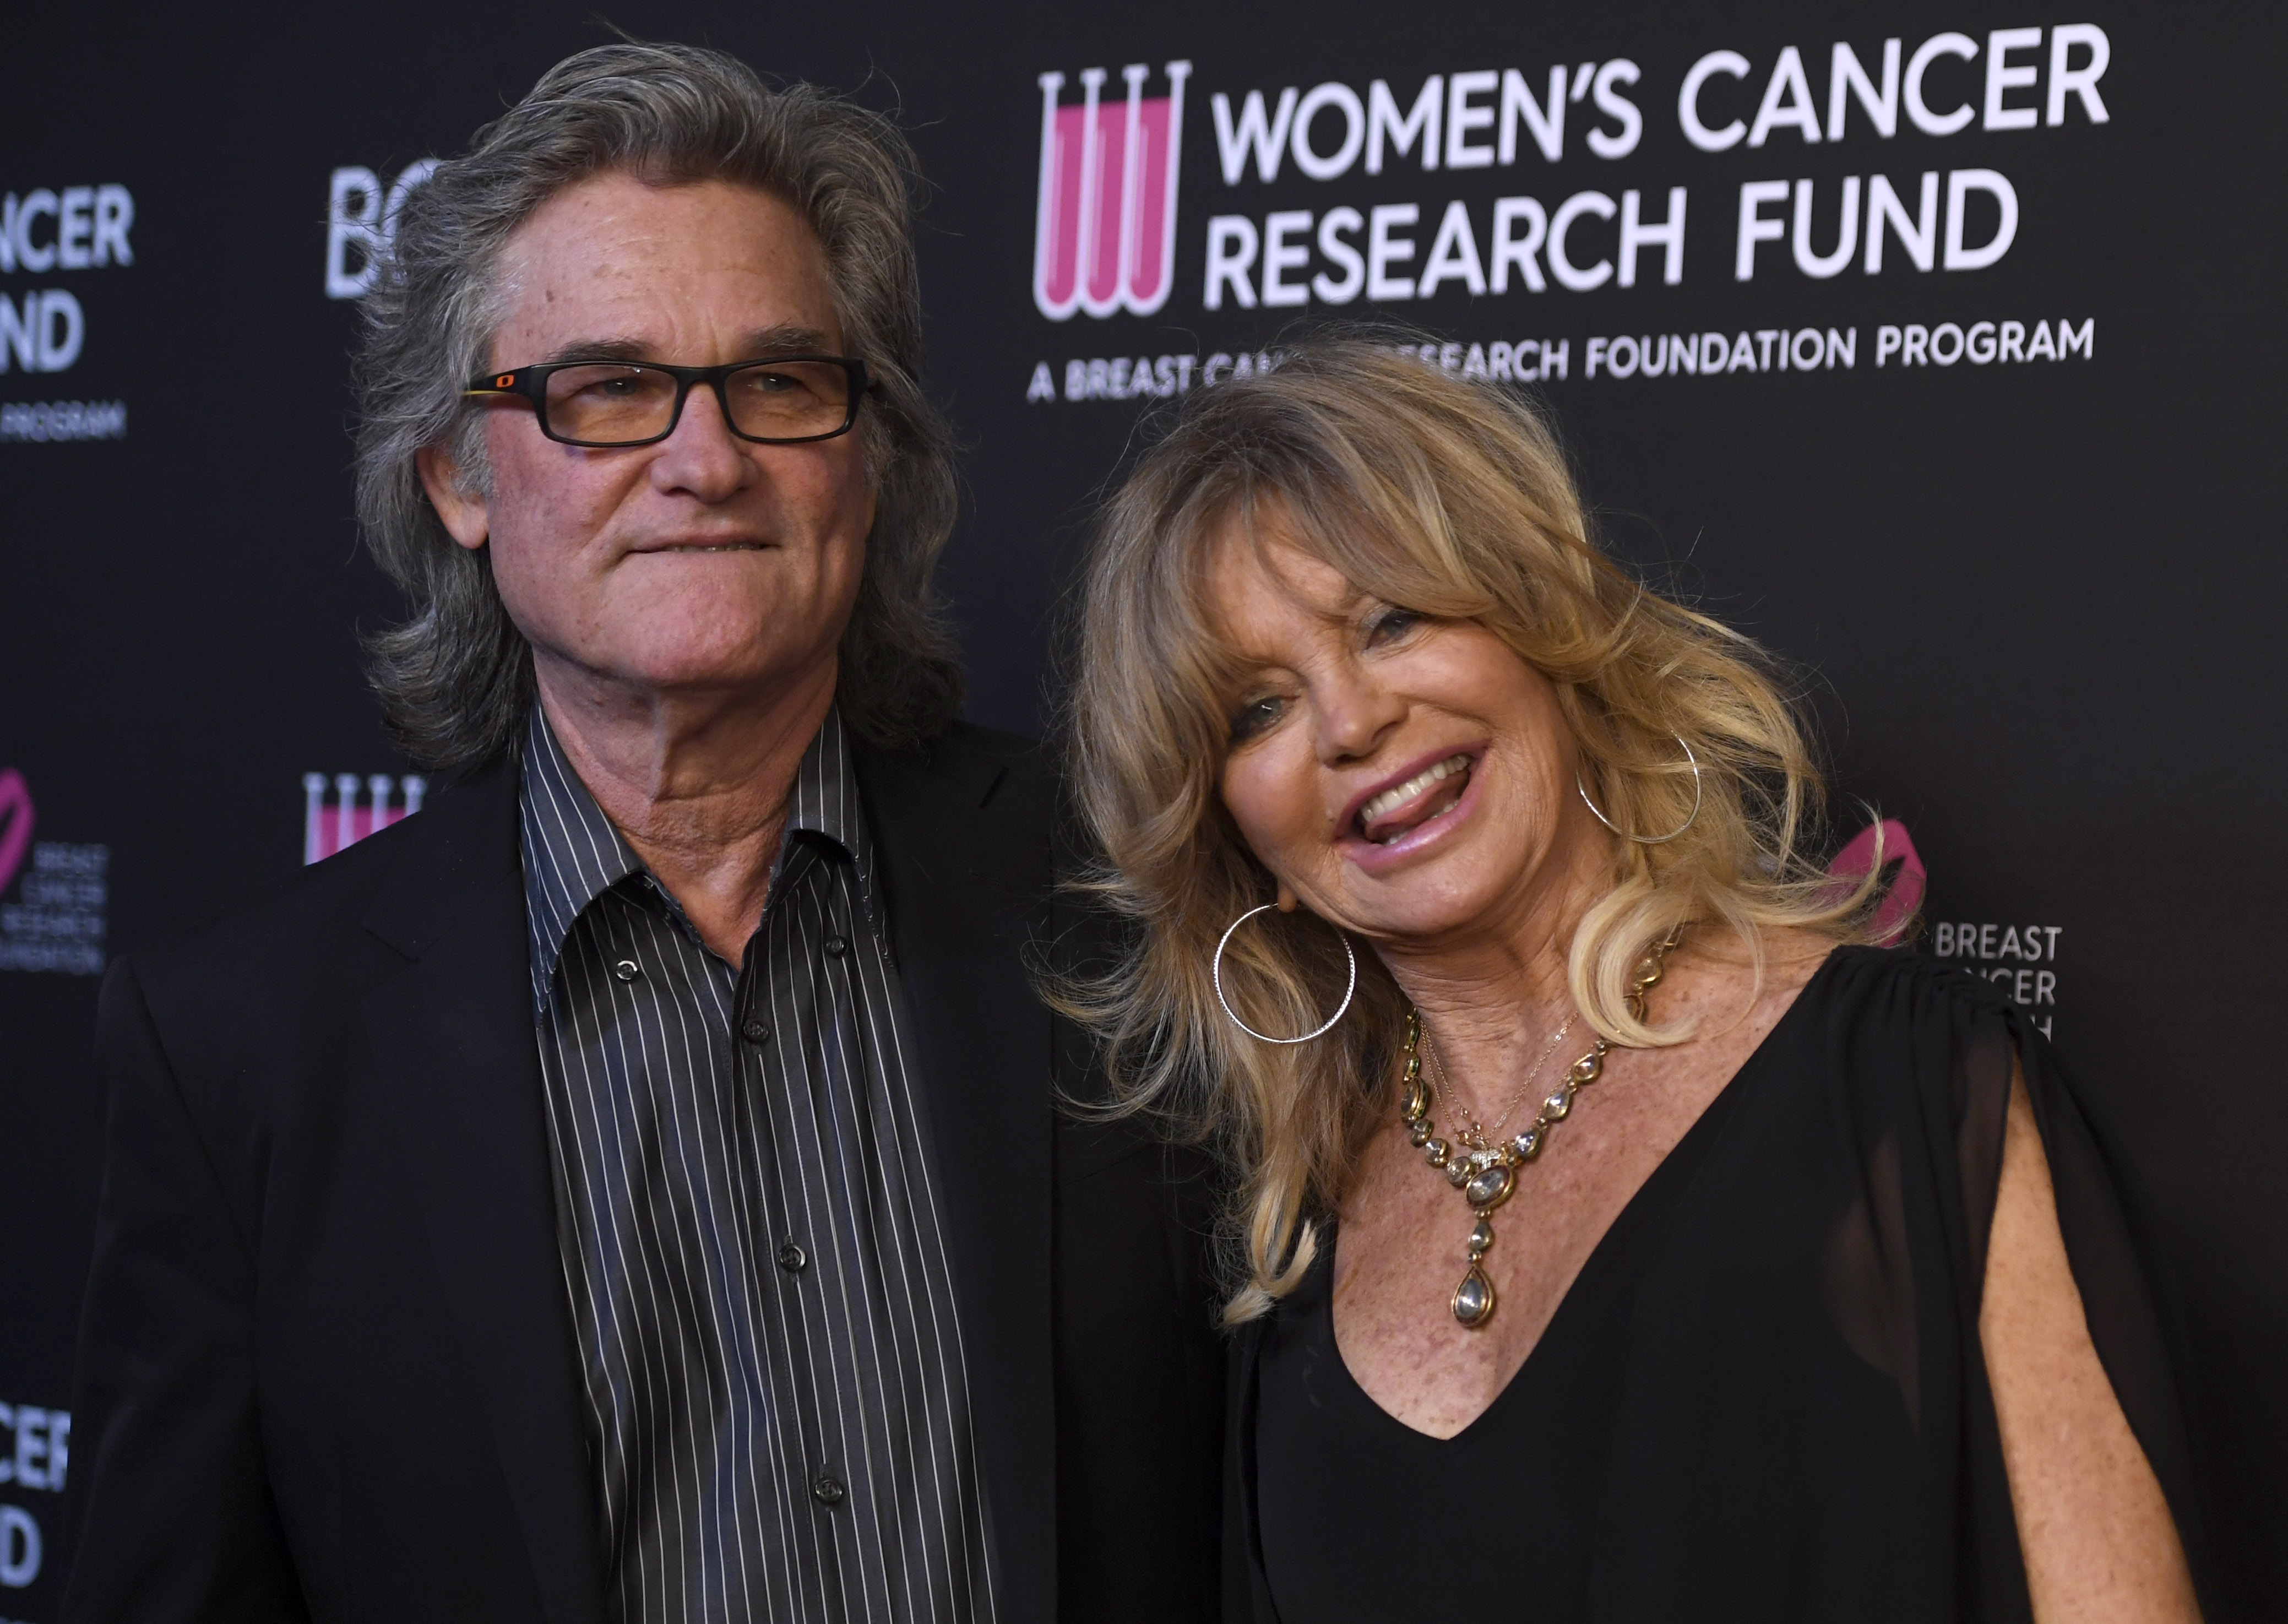 Kurt Russell and Goldie Hawn attend The Women's Cancer Research Fund's Benefit Gala in Beverly Hills, California on February 28, 2019 | Source: Getty Images